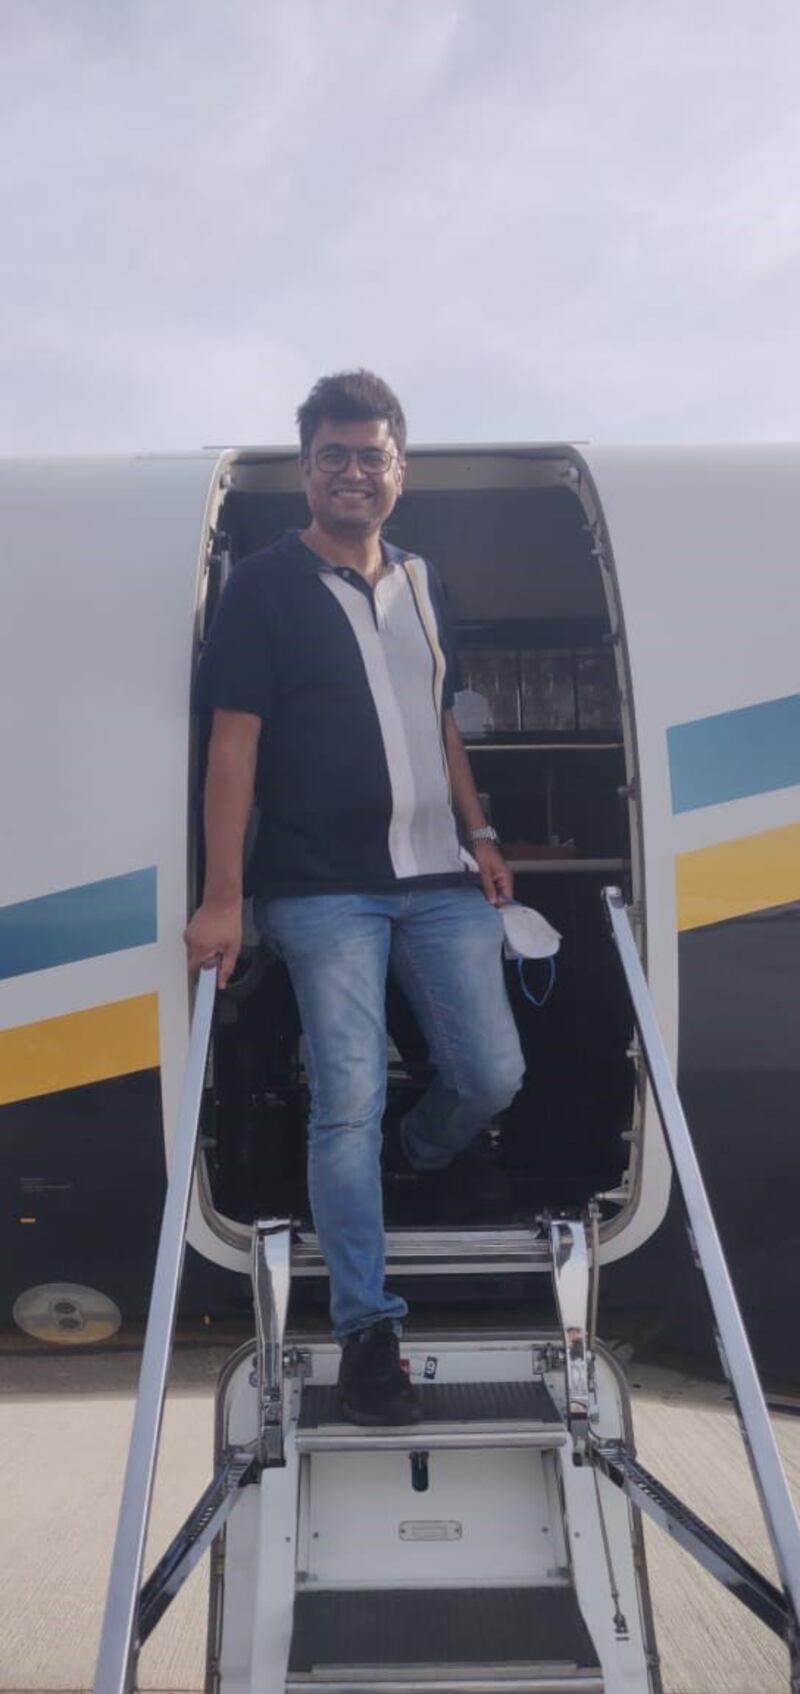 Dr Rahul Gupta returns to Dubai on a business jet with 13 others earlier this month after being stuck in India for weeks when he went to care for his mother-in-law. A quick diagnosis helped save the life of his mother-in-law who contracted Covid-19 in India. Courtesy: Dr Gupta